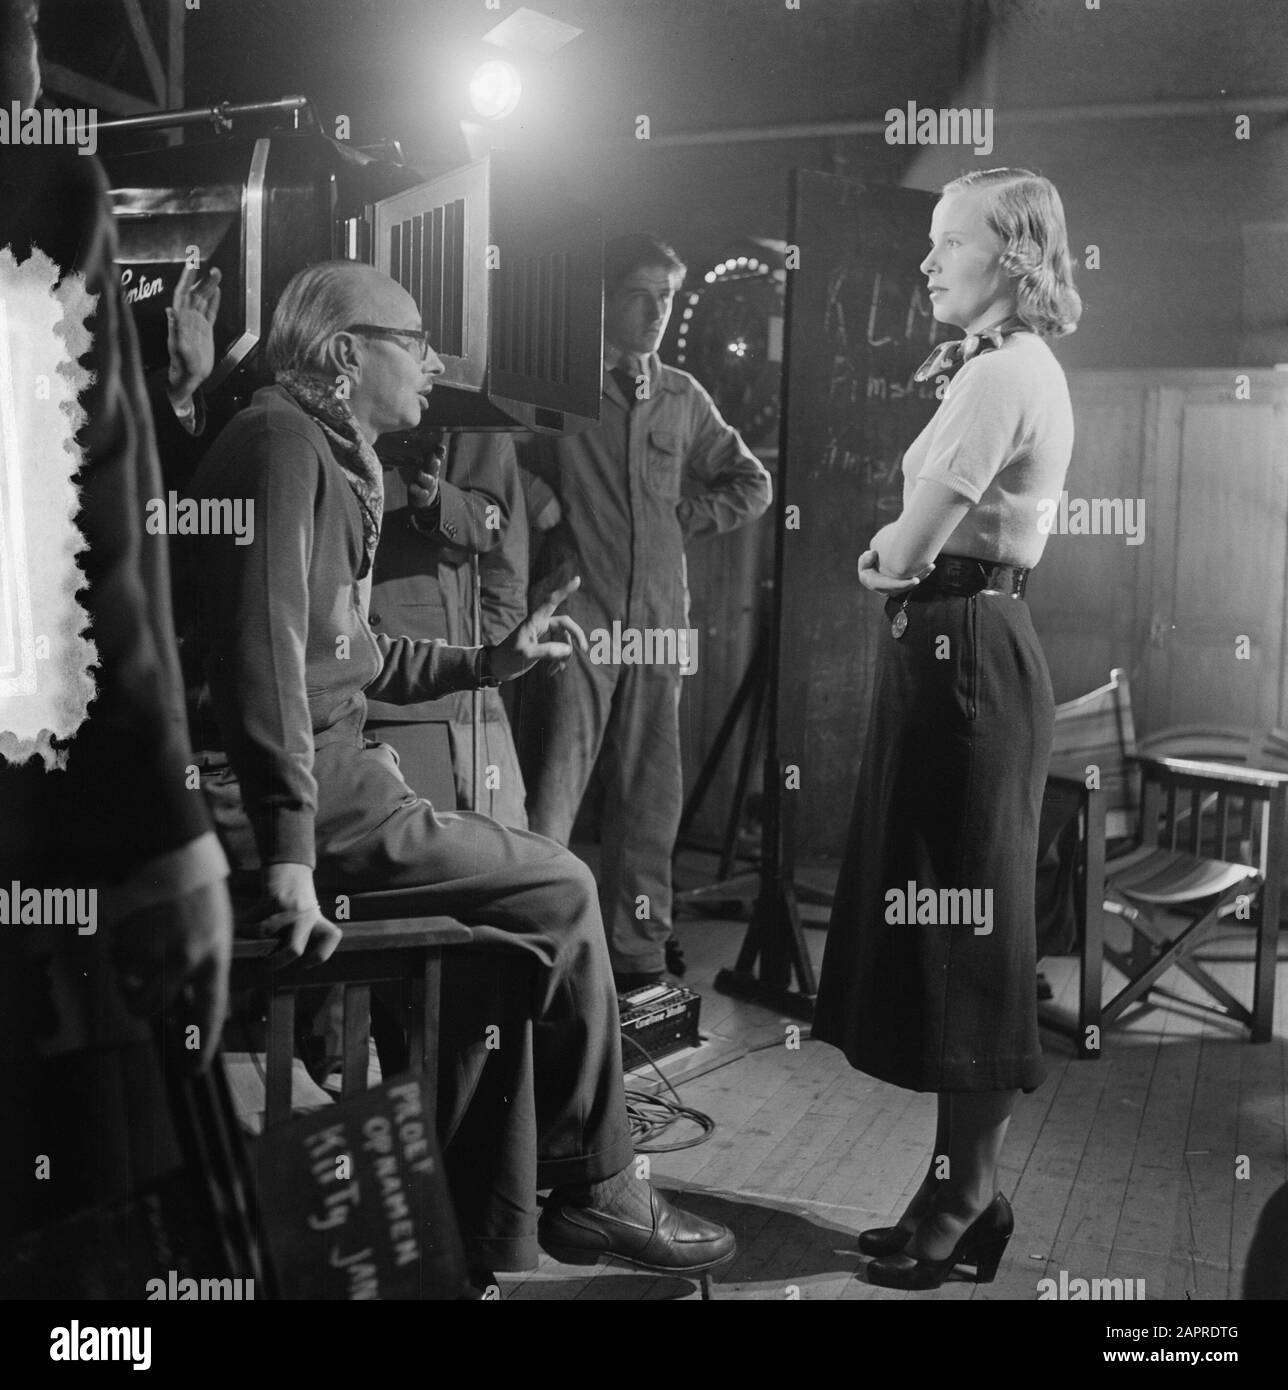 Film. Trial recordings Stars shine everywhere Annotation: Kitty Jansen and left the director Gerard Rutten. Location: Cinetone Studio Duivendrecht Date: 13 October 1952 Location: Duivendrecht Keywords: actors, film, directors, work recordings Personal name: Janssen, Kitty, Rutten, Gerard Stock Photo